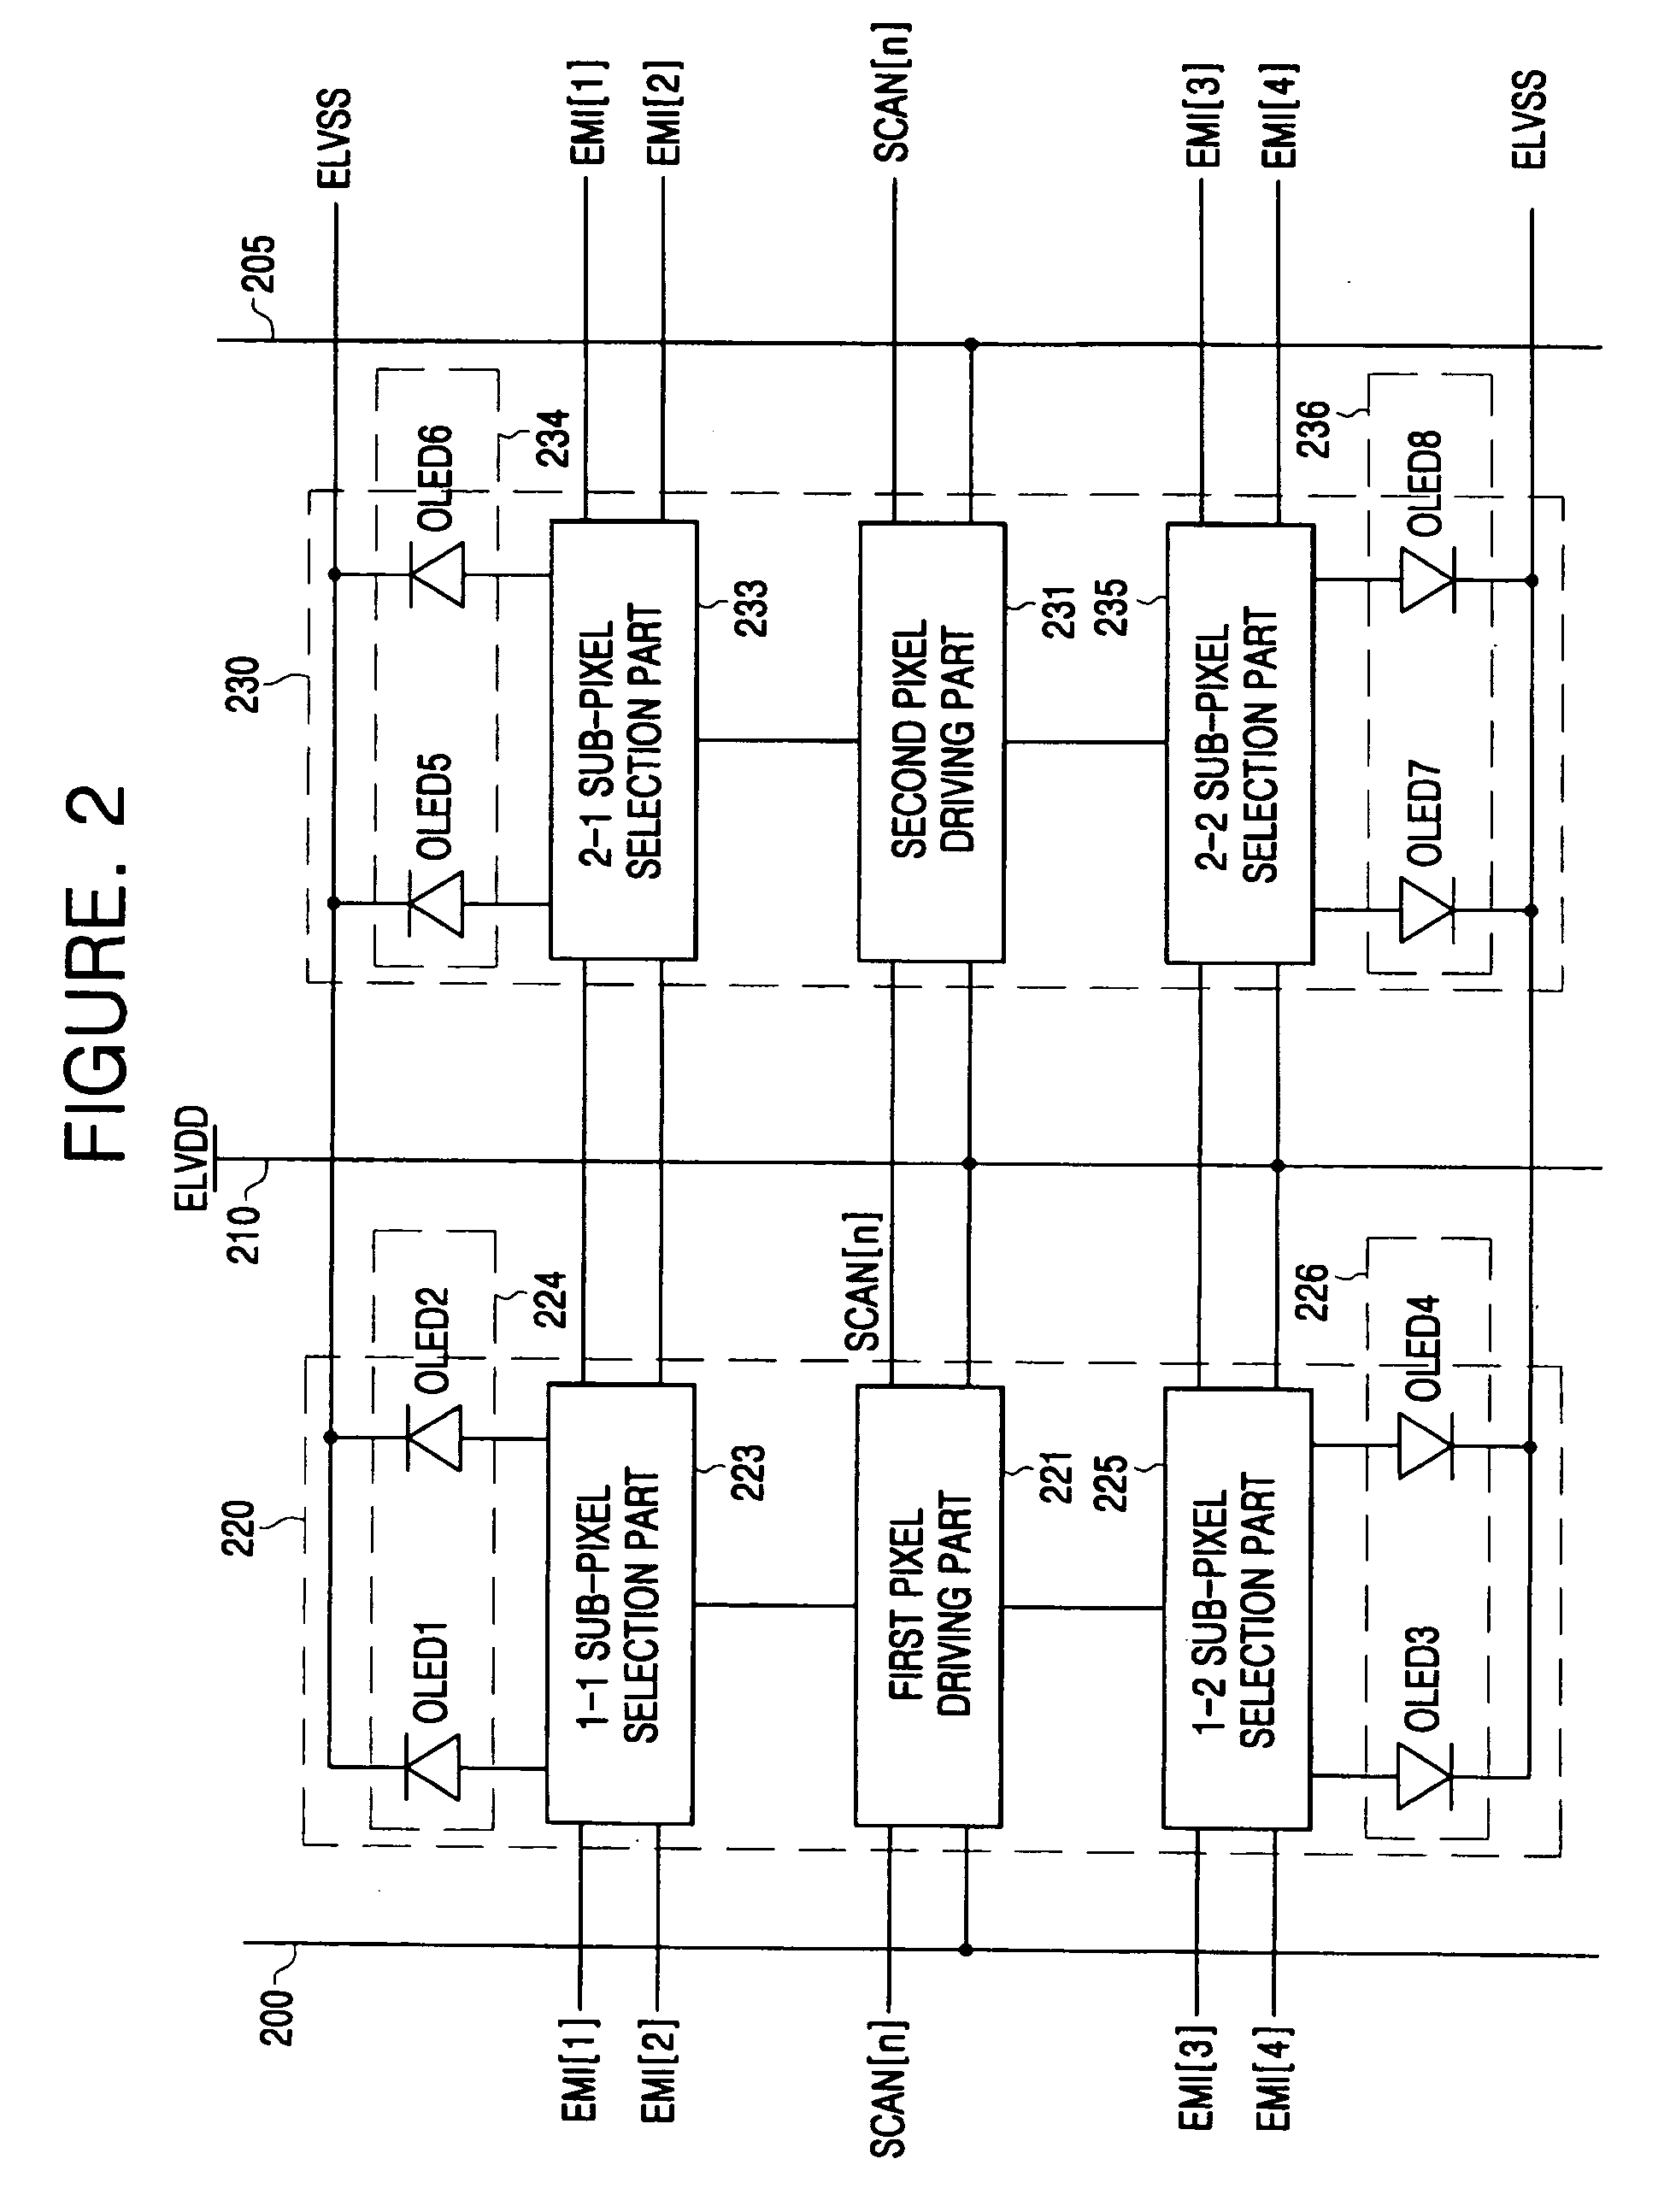 Time-divisional driving organic electroluminescence display